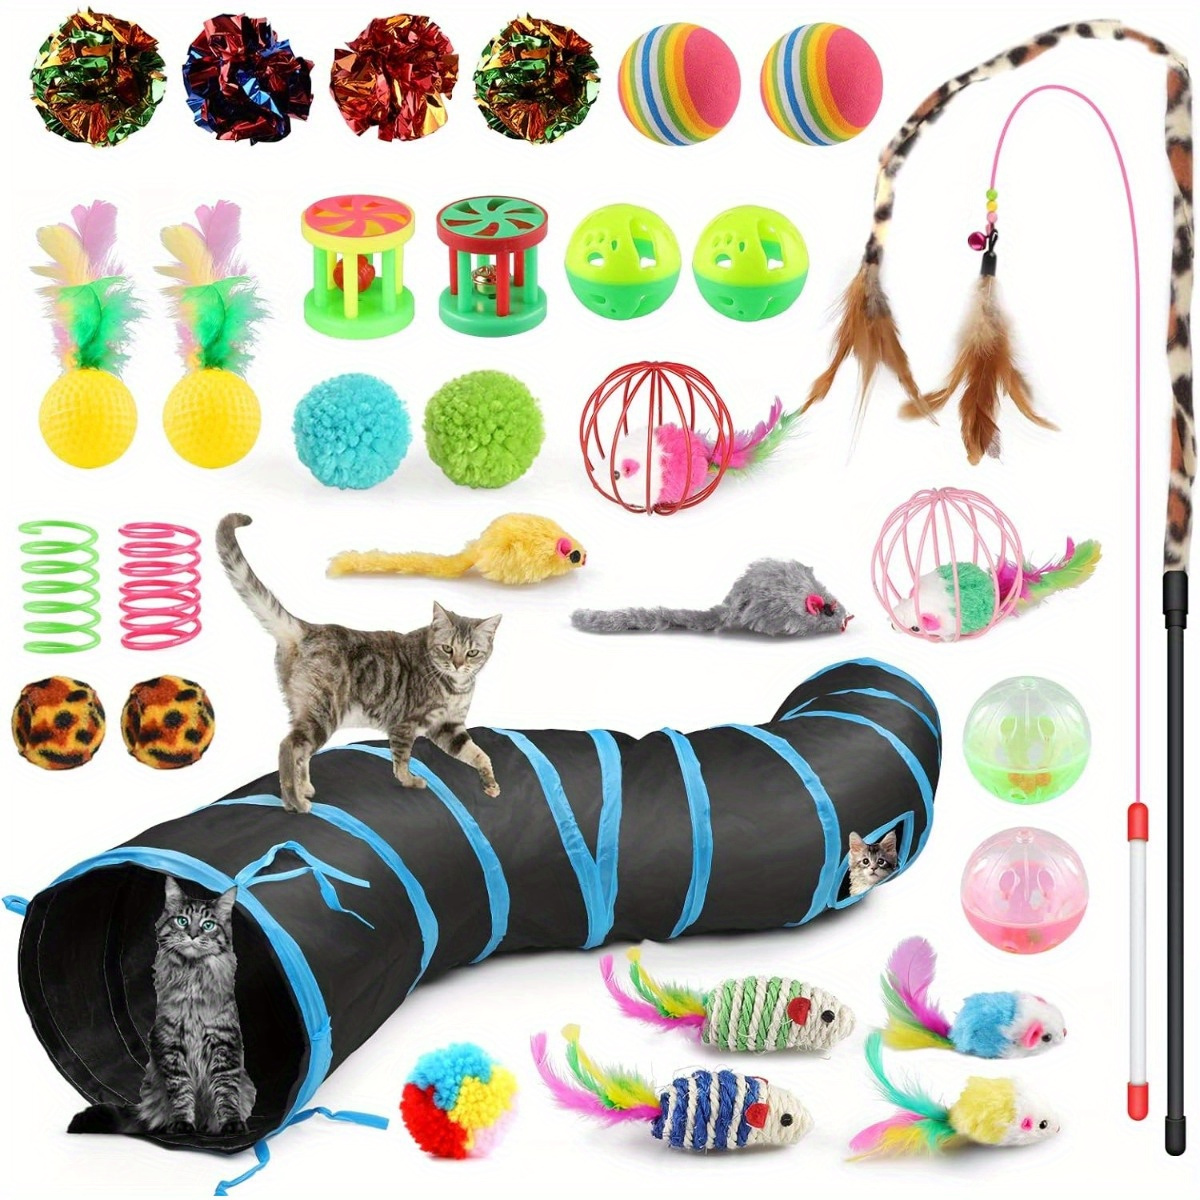 32 PCS Cat Toys Set Kitten Toys Assortments Including 2 Way Rainbow Tunnel  Cat Feather Teaser Wand Sisal Mice Bell Balls Crinkle Balls Interactive Cat